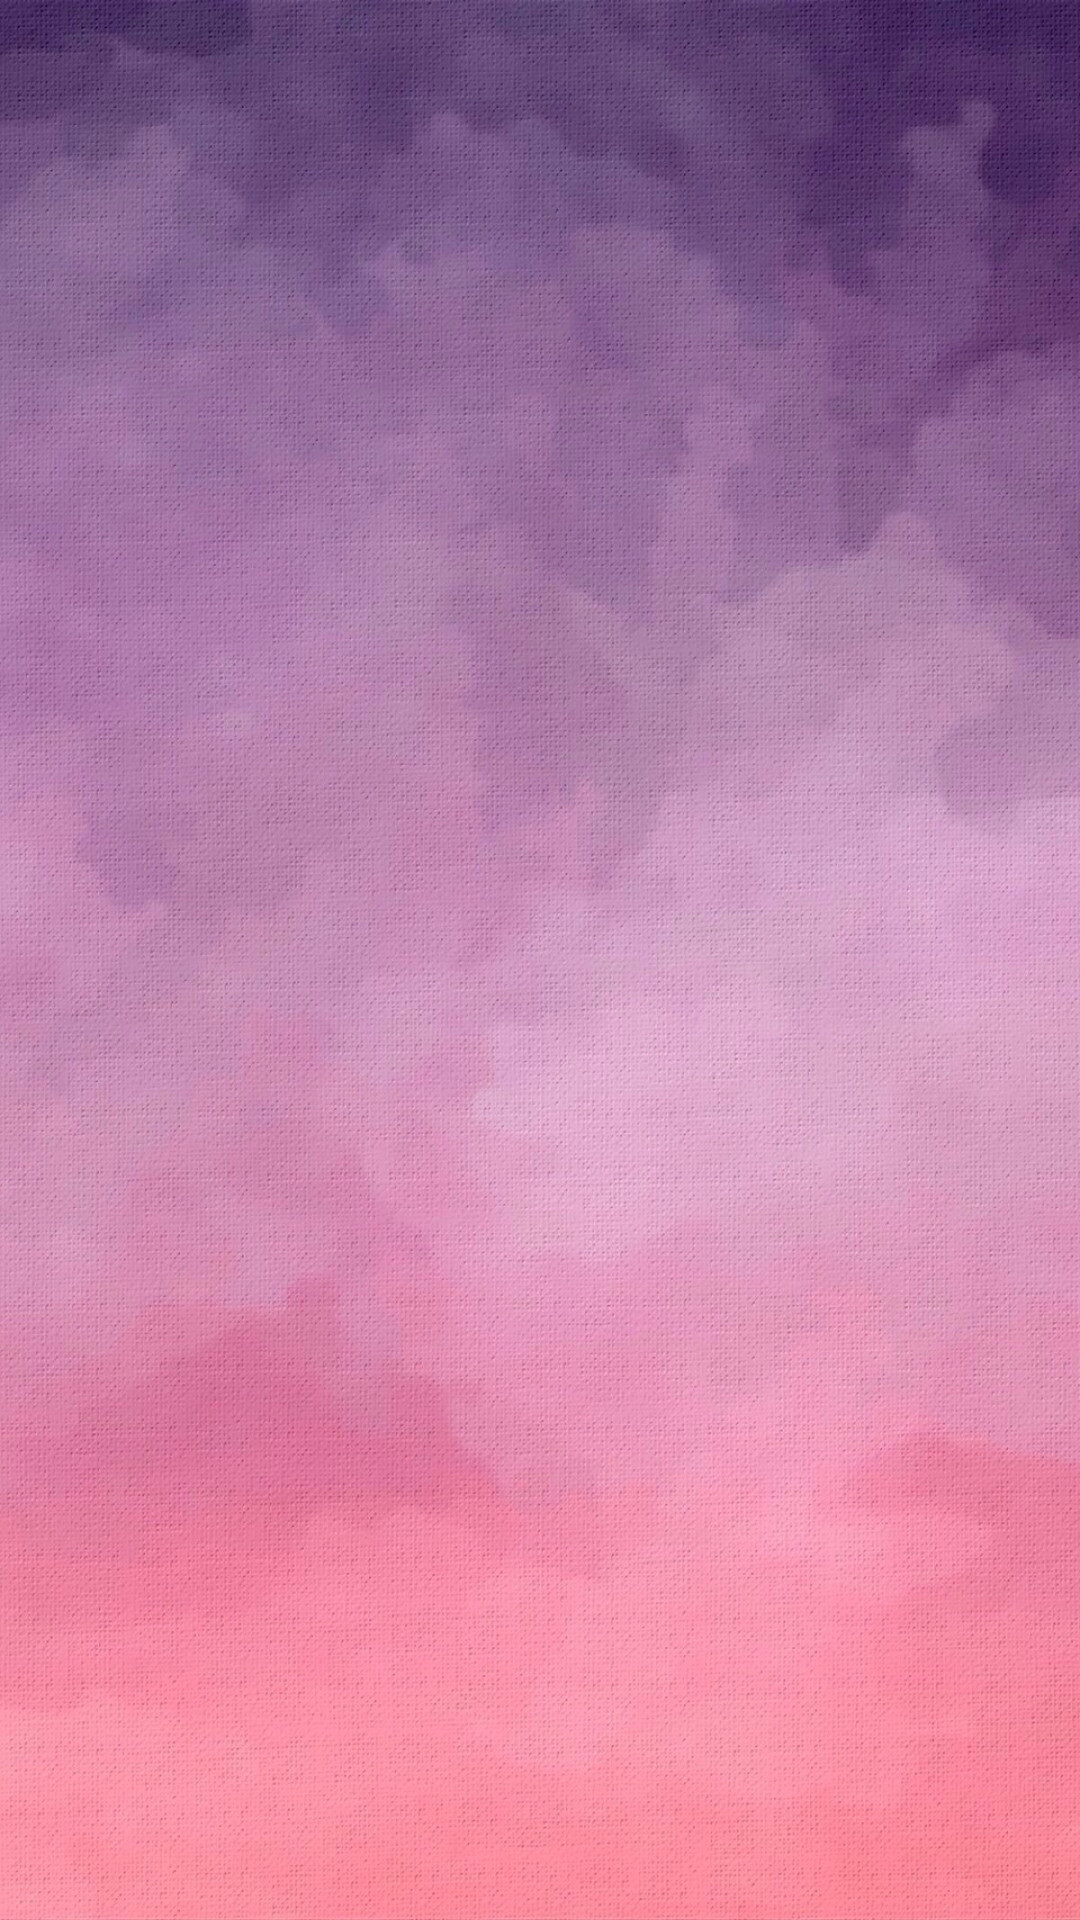 1080x1920 Backgrounds Phone Wallpapers HD.